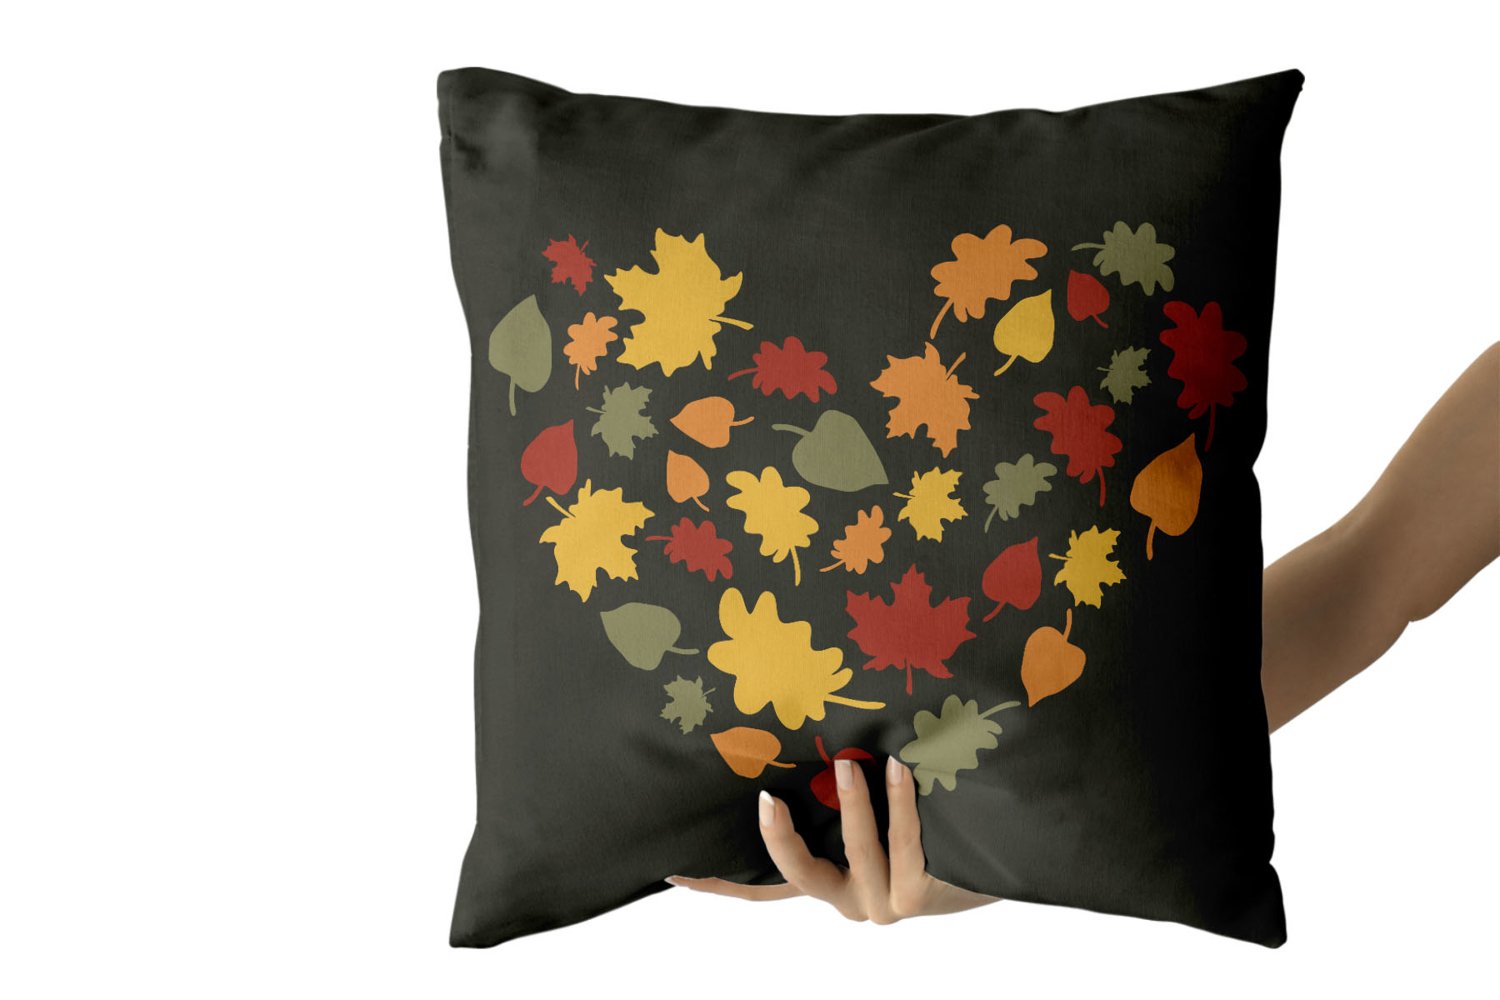 Black pillow with Falling leaves heart.